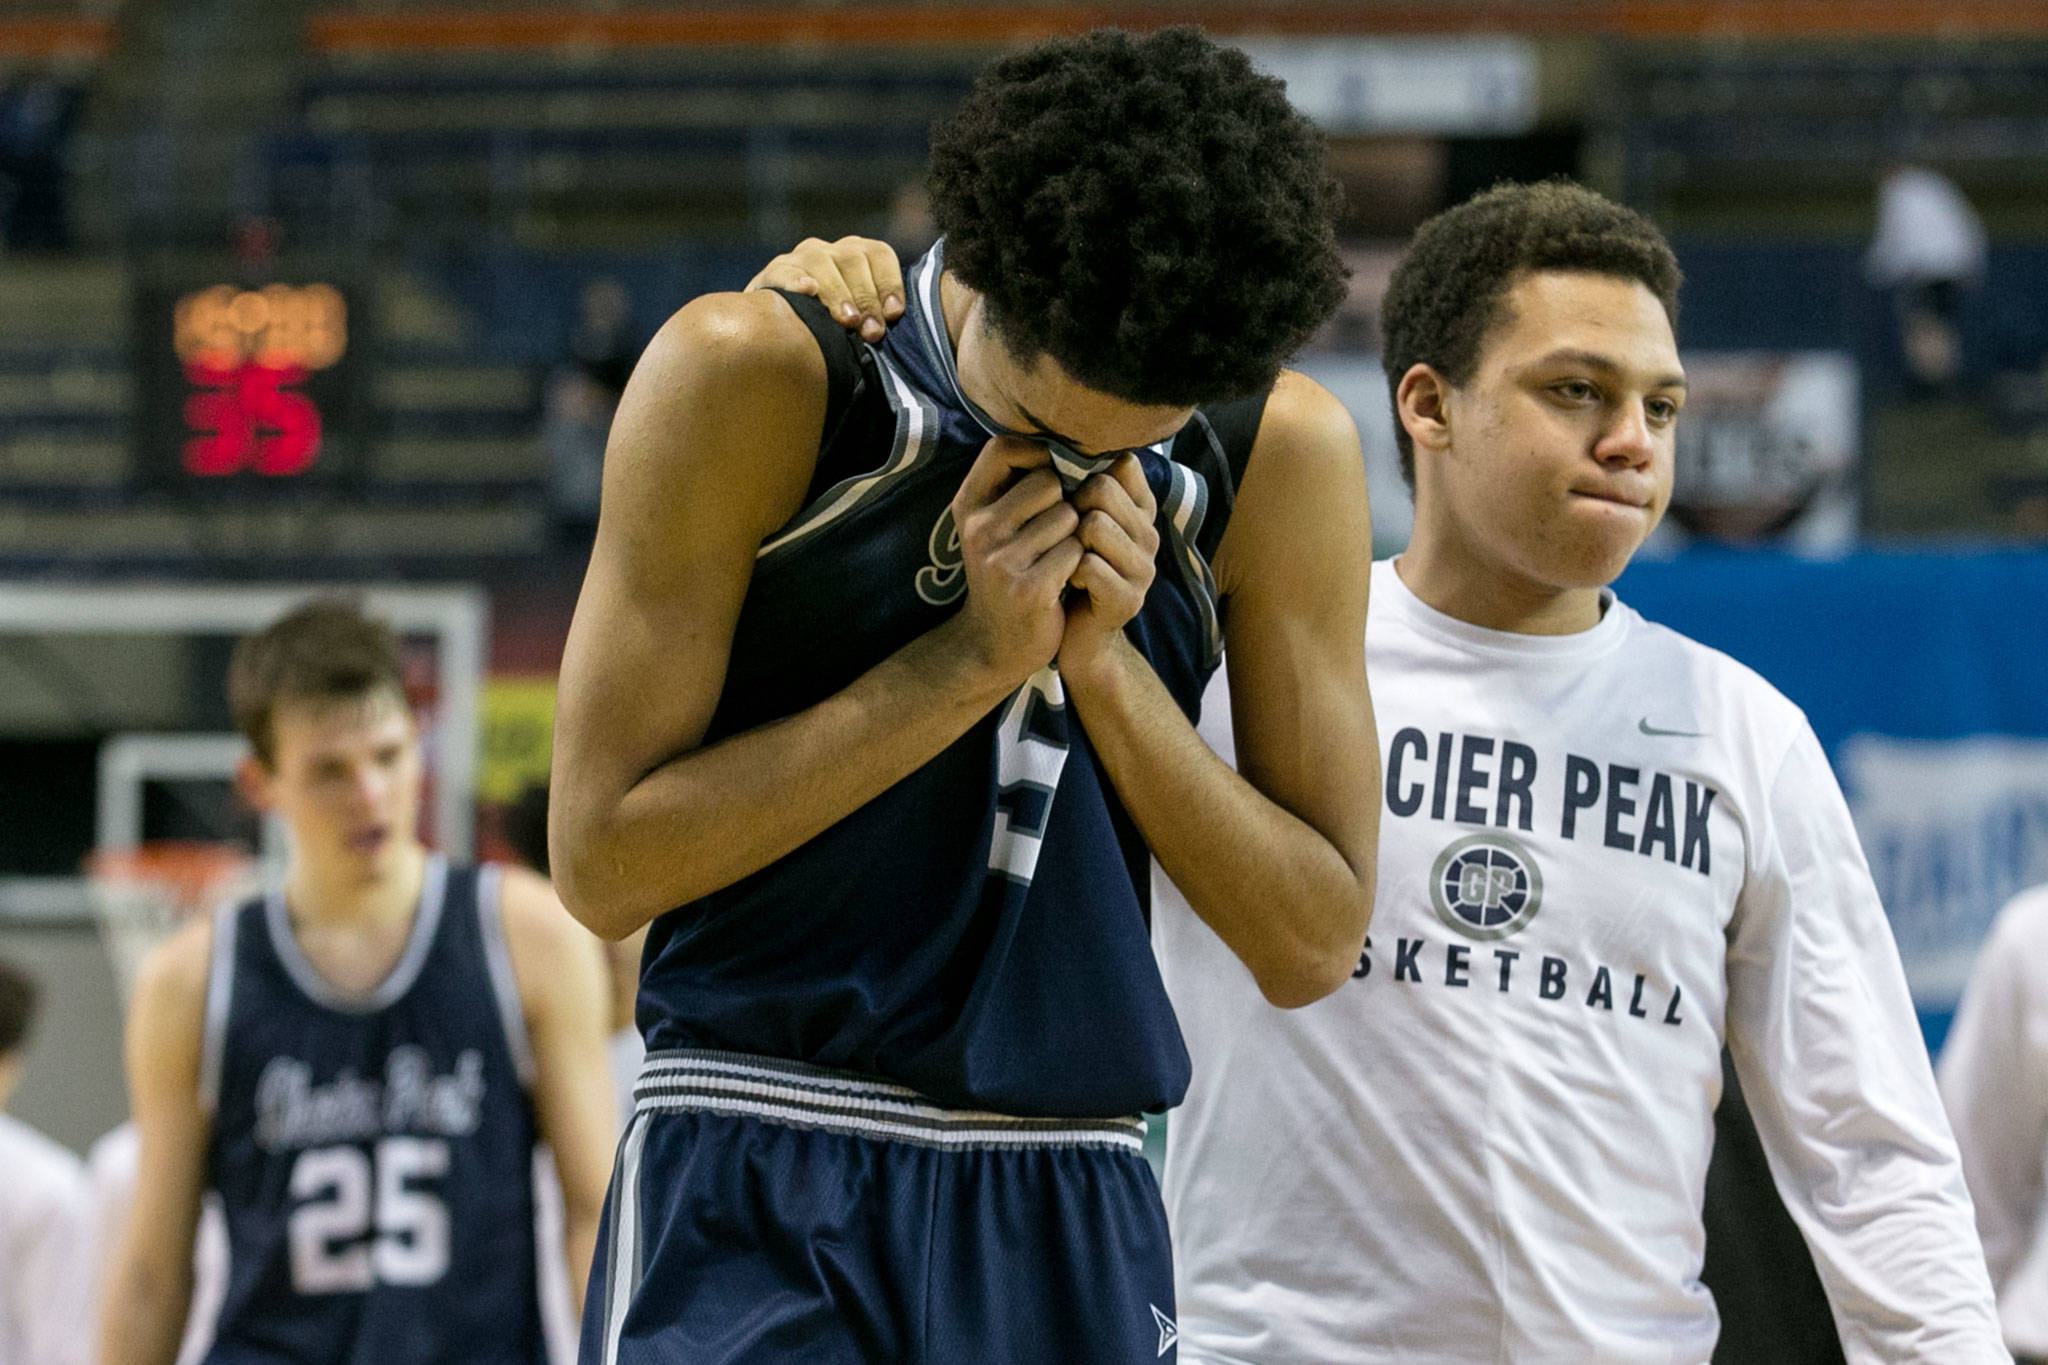 Glacier Peak’s Trey Lawrence (left) is consoled by teammate Tony Collins after the Grizzlies lost to Skyview 68-67 in an opening round game at the 4A state tournament Wednesday at the Tacoma Dome. (Kevin Clark / The Herald)